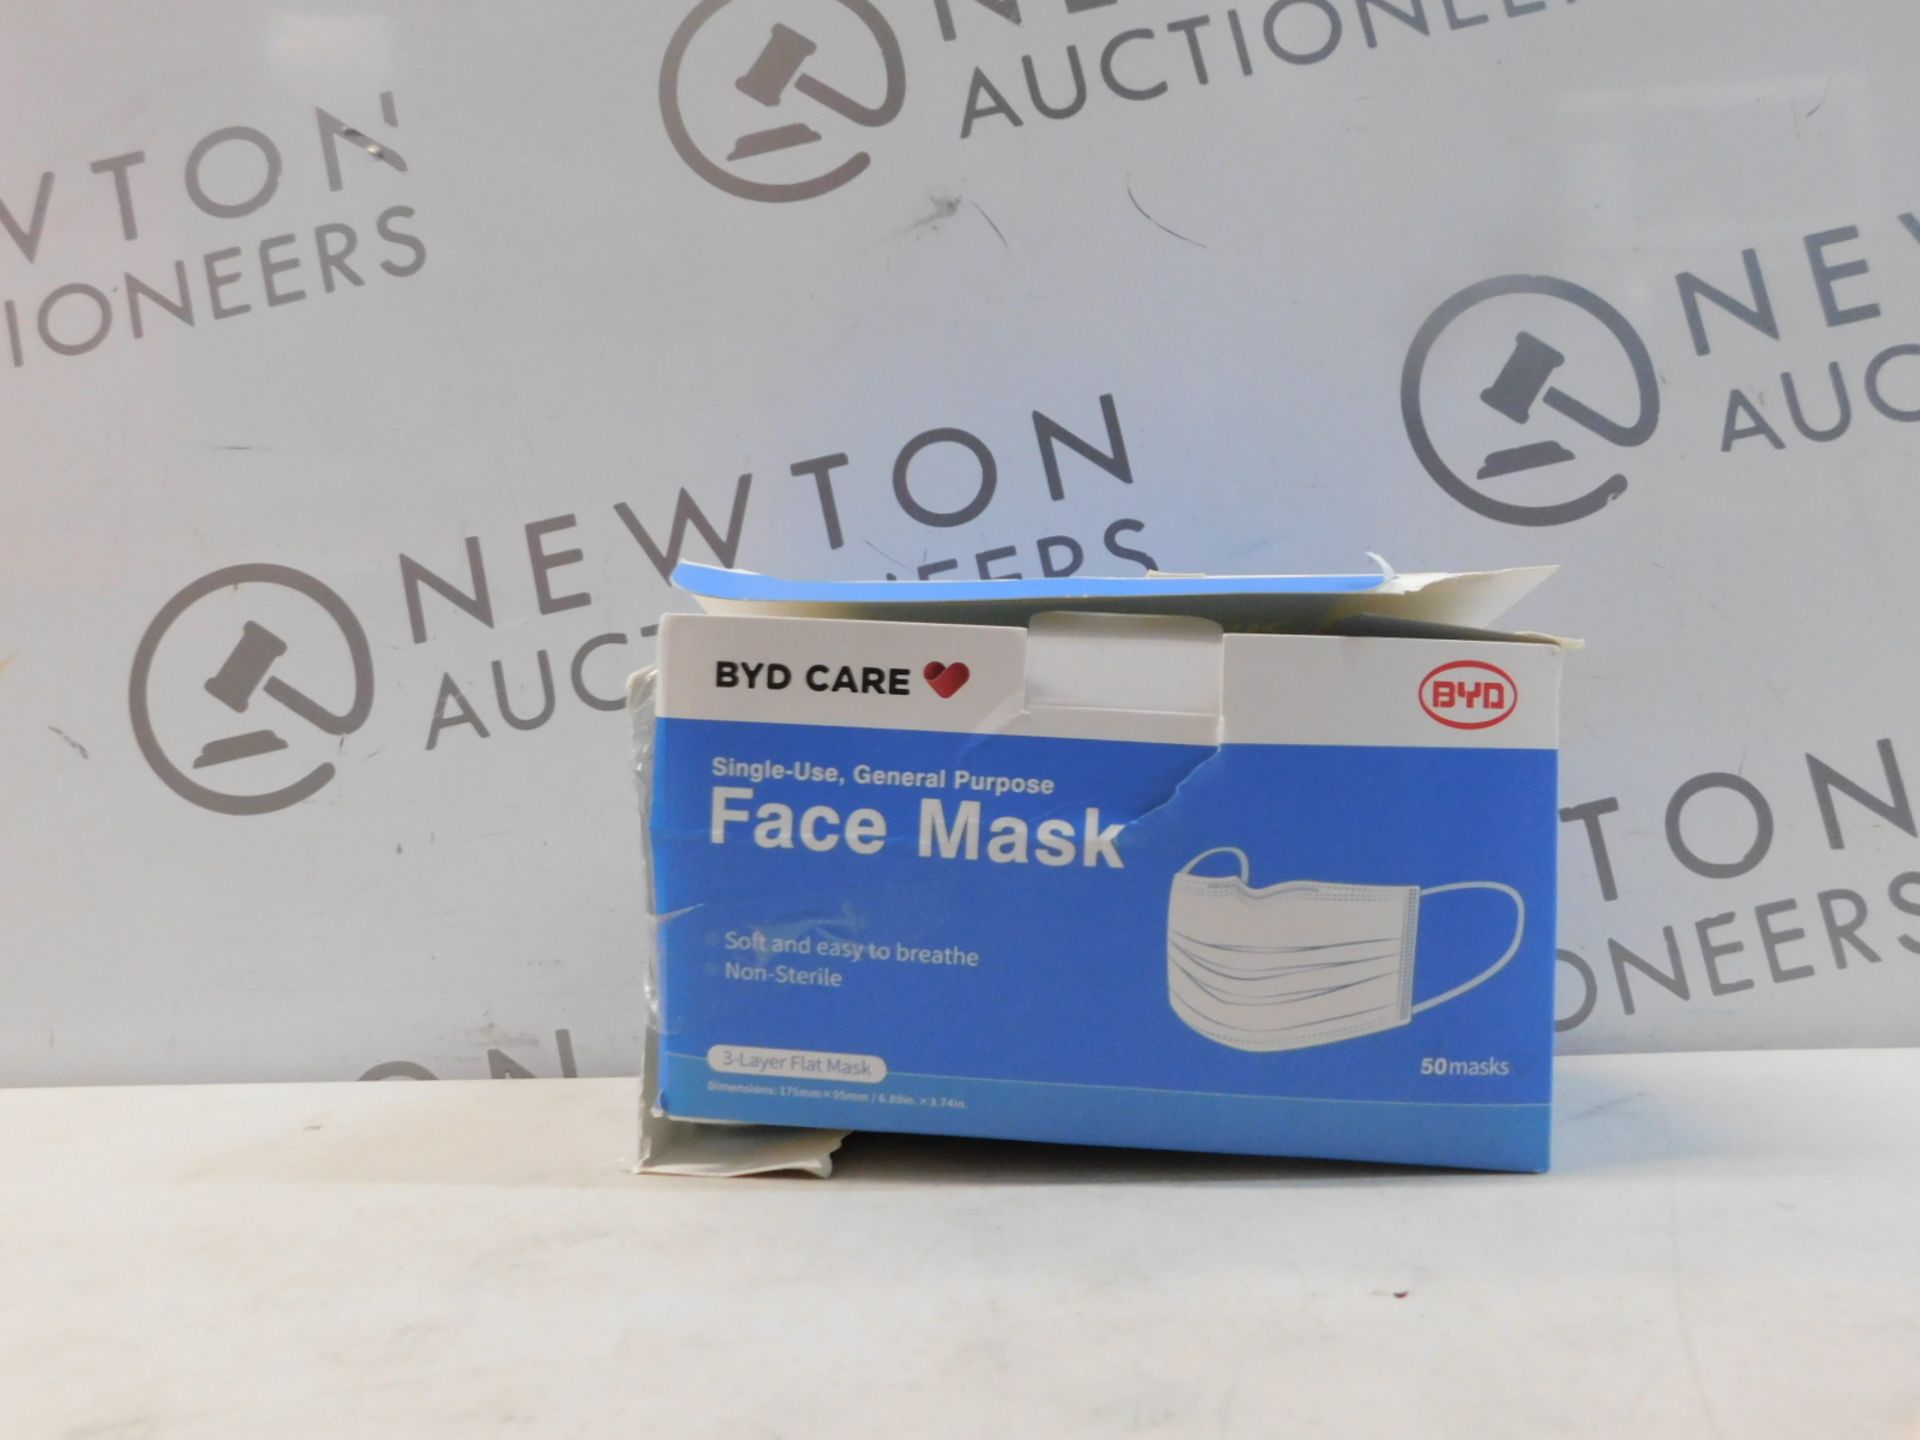 1 NEW BOXED BYD 3PLY SINGLE USE FACE MASK, 50 PACK RRP Â£15